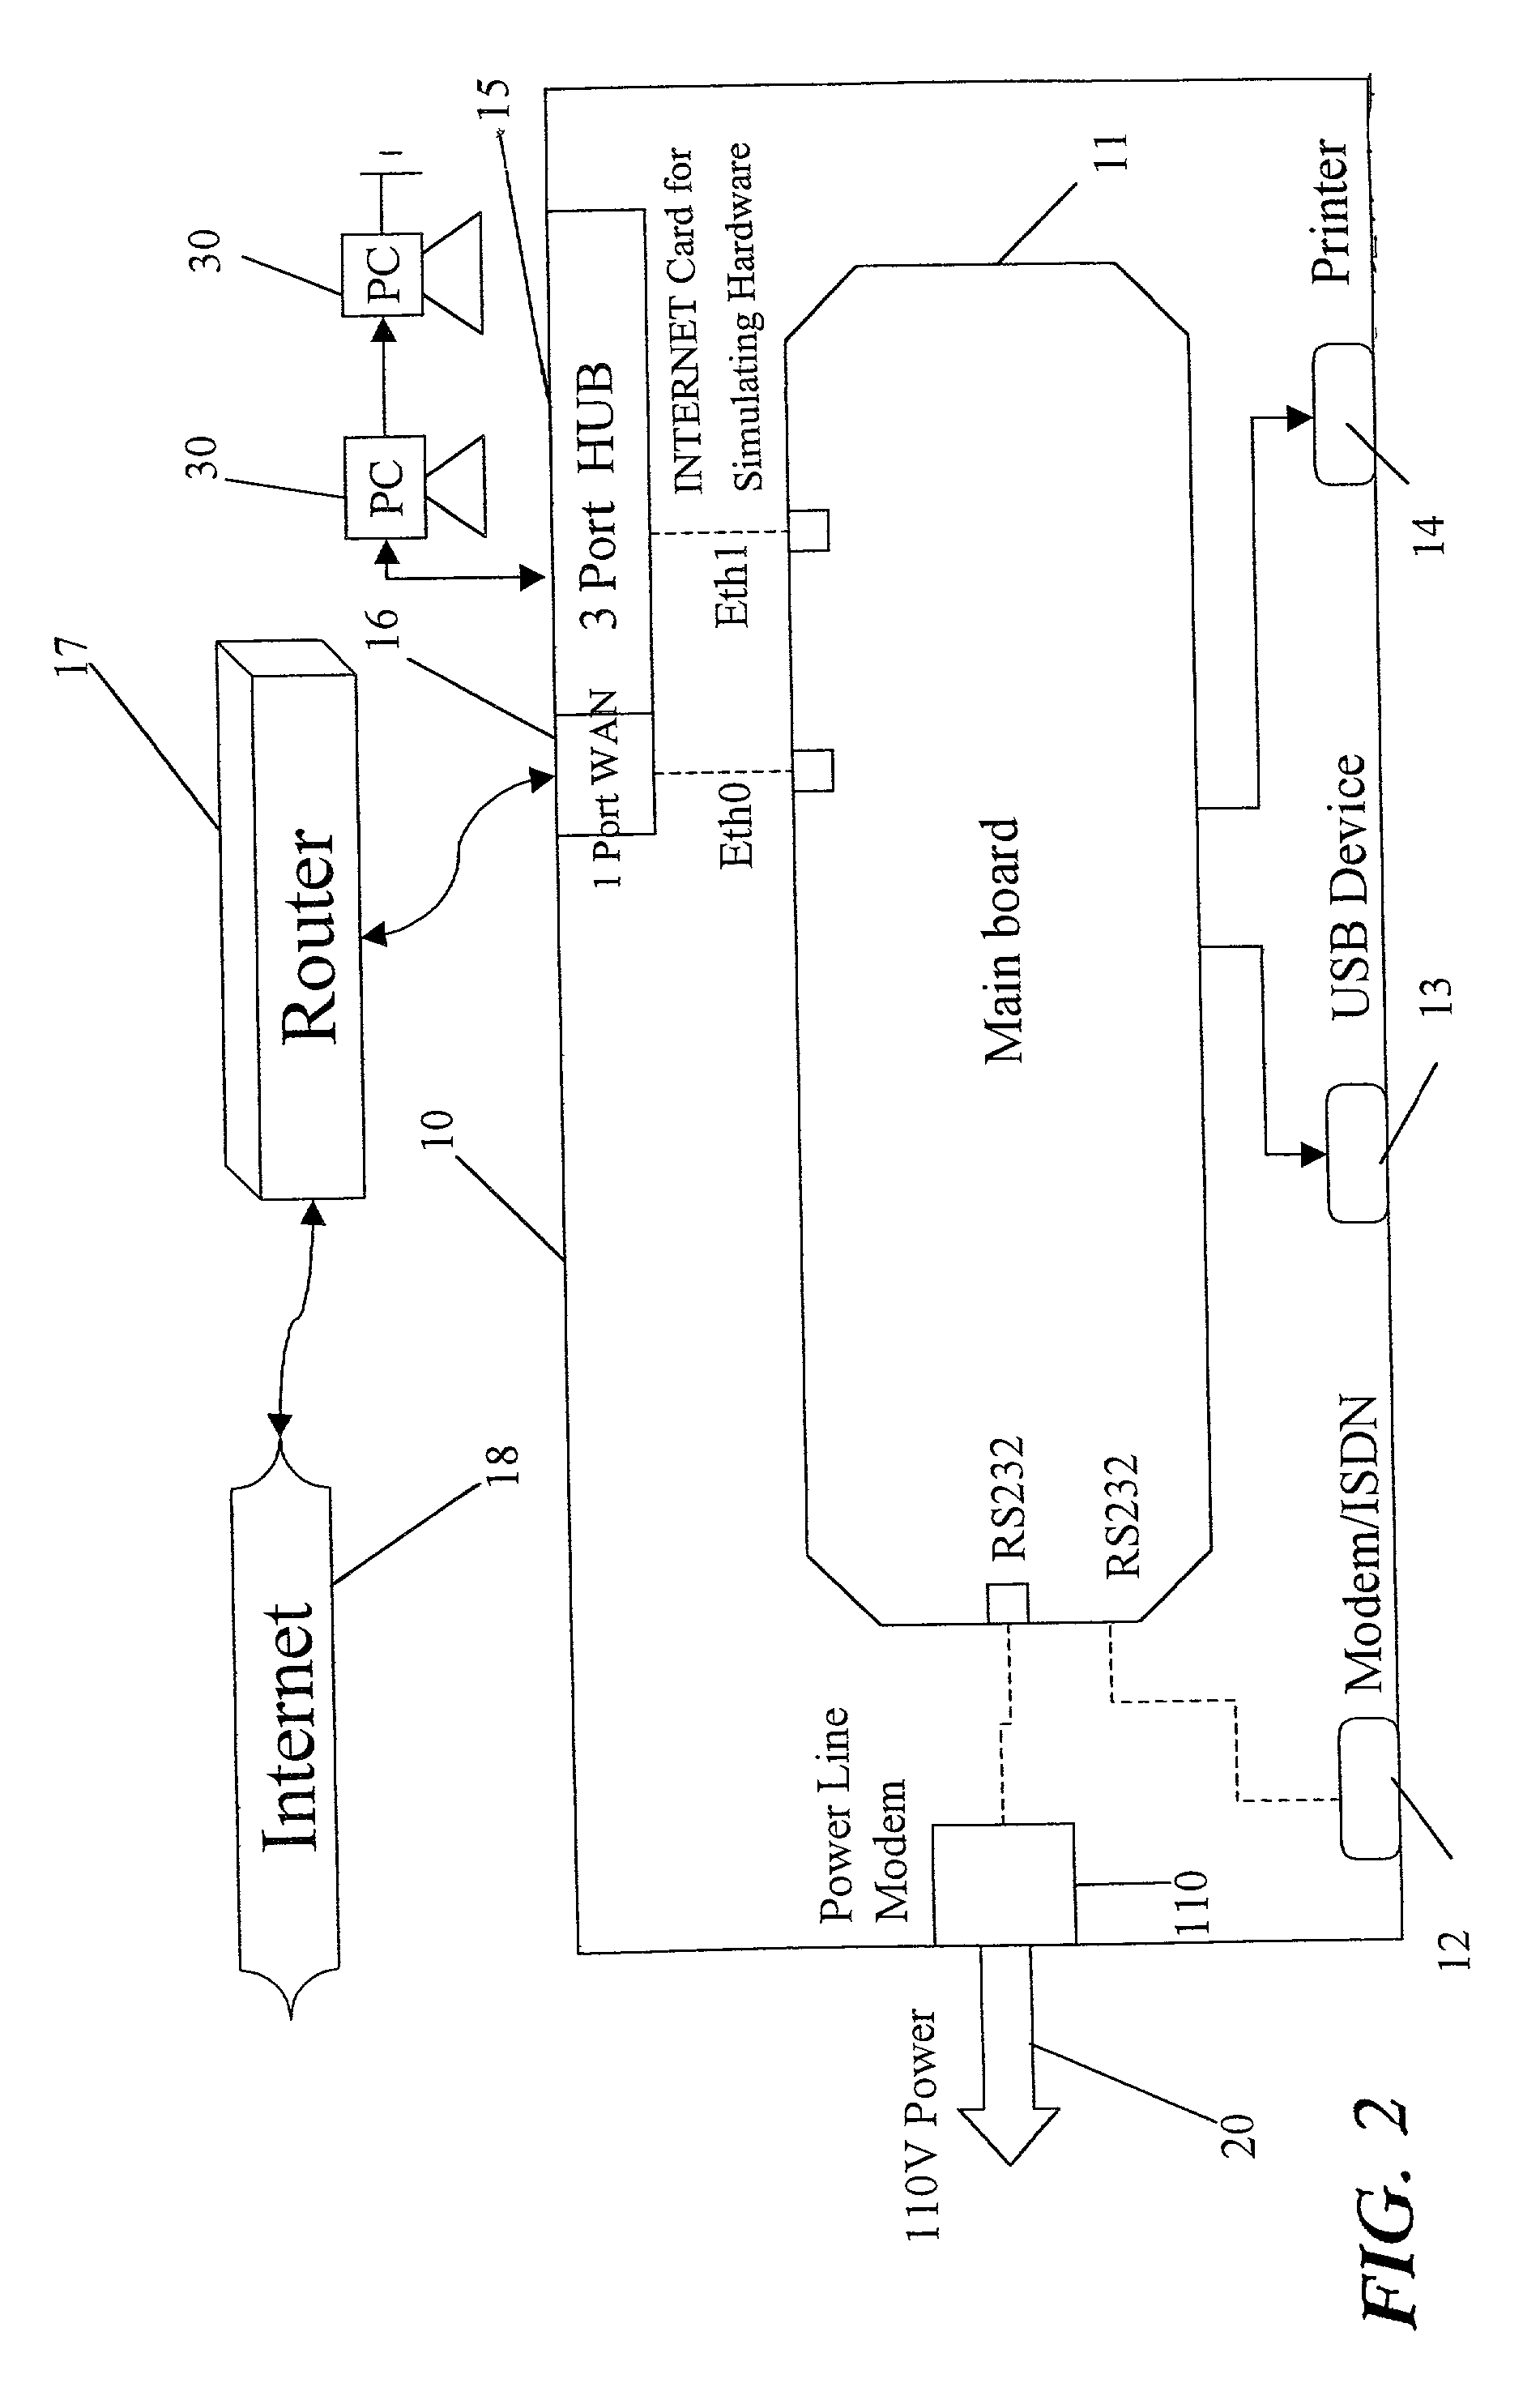 Remote control method for controlling electrical appliance via home gateway